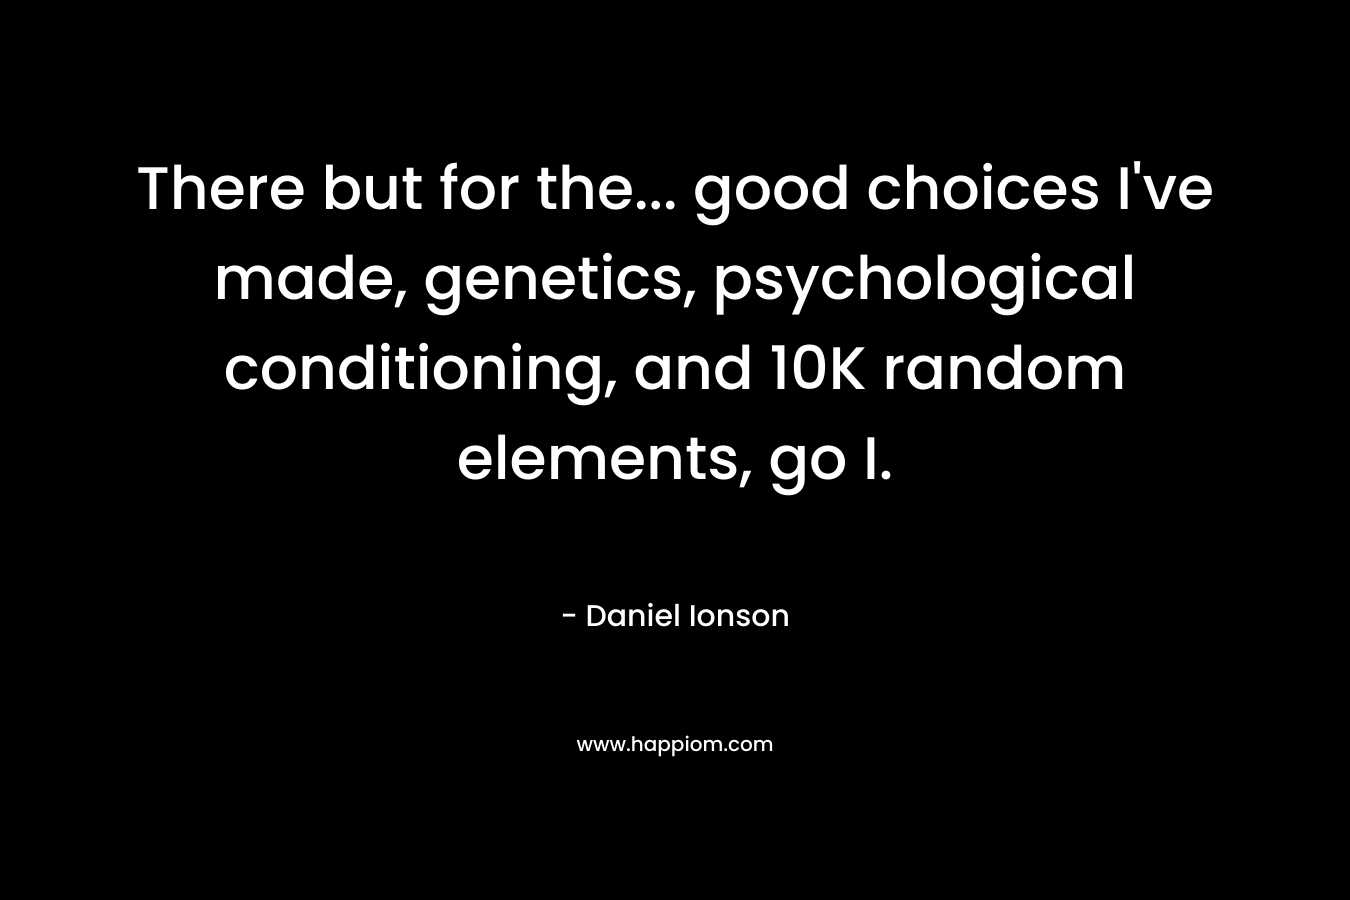 There but for the... good choices I've made, genetics, psychological conditioning, and 10K random elements, go I.